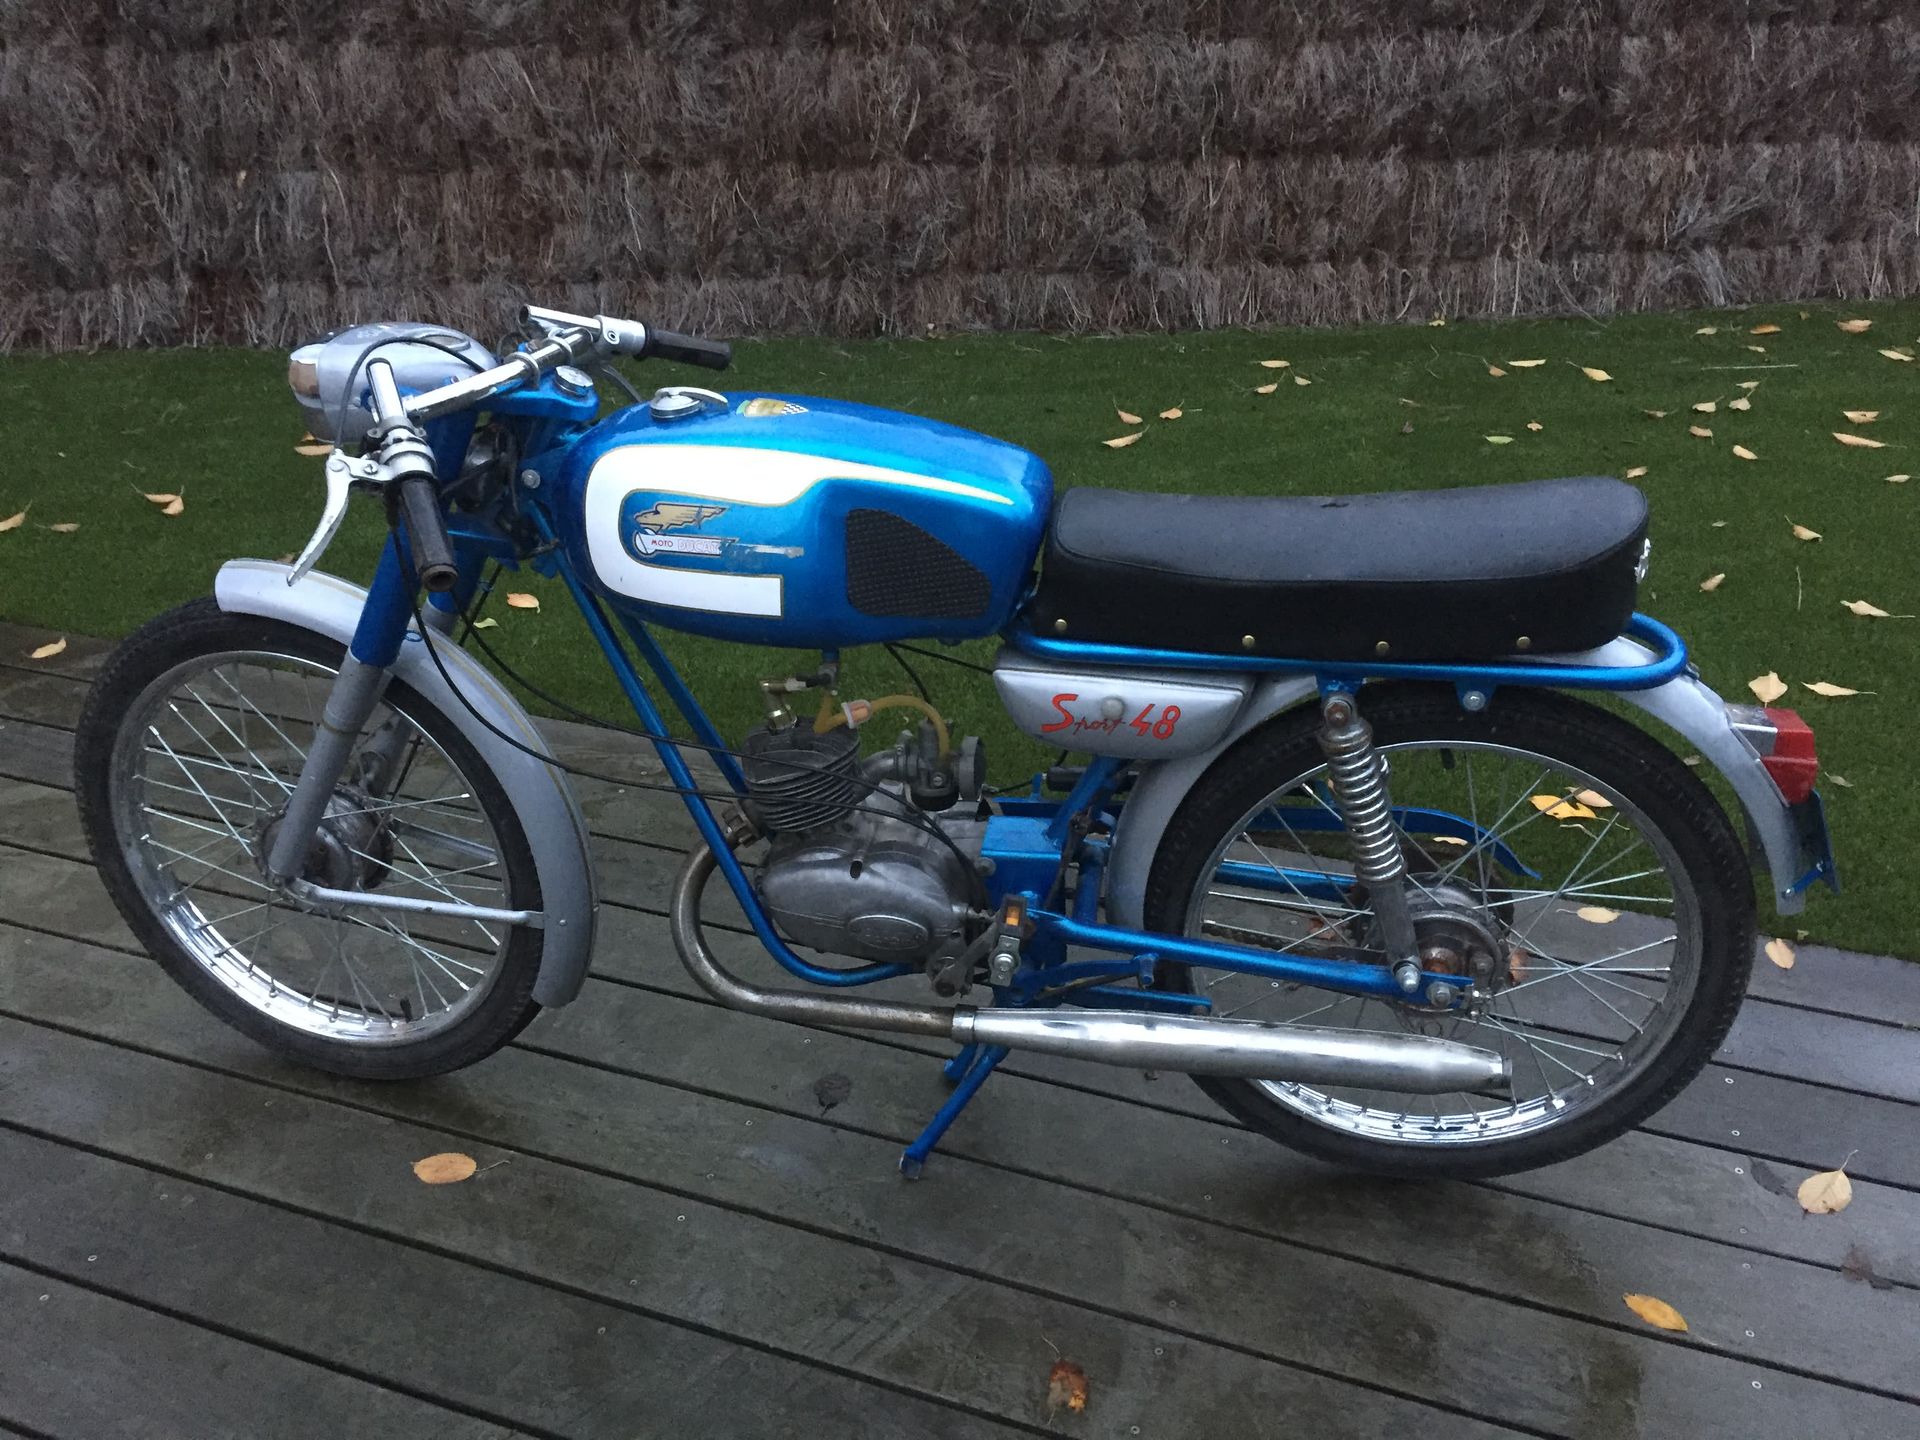 1963 Ducati 48 Sport Engine number : 334627

CG collection

To be restarted

Duc&hellip;